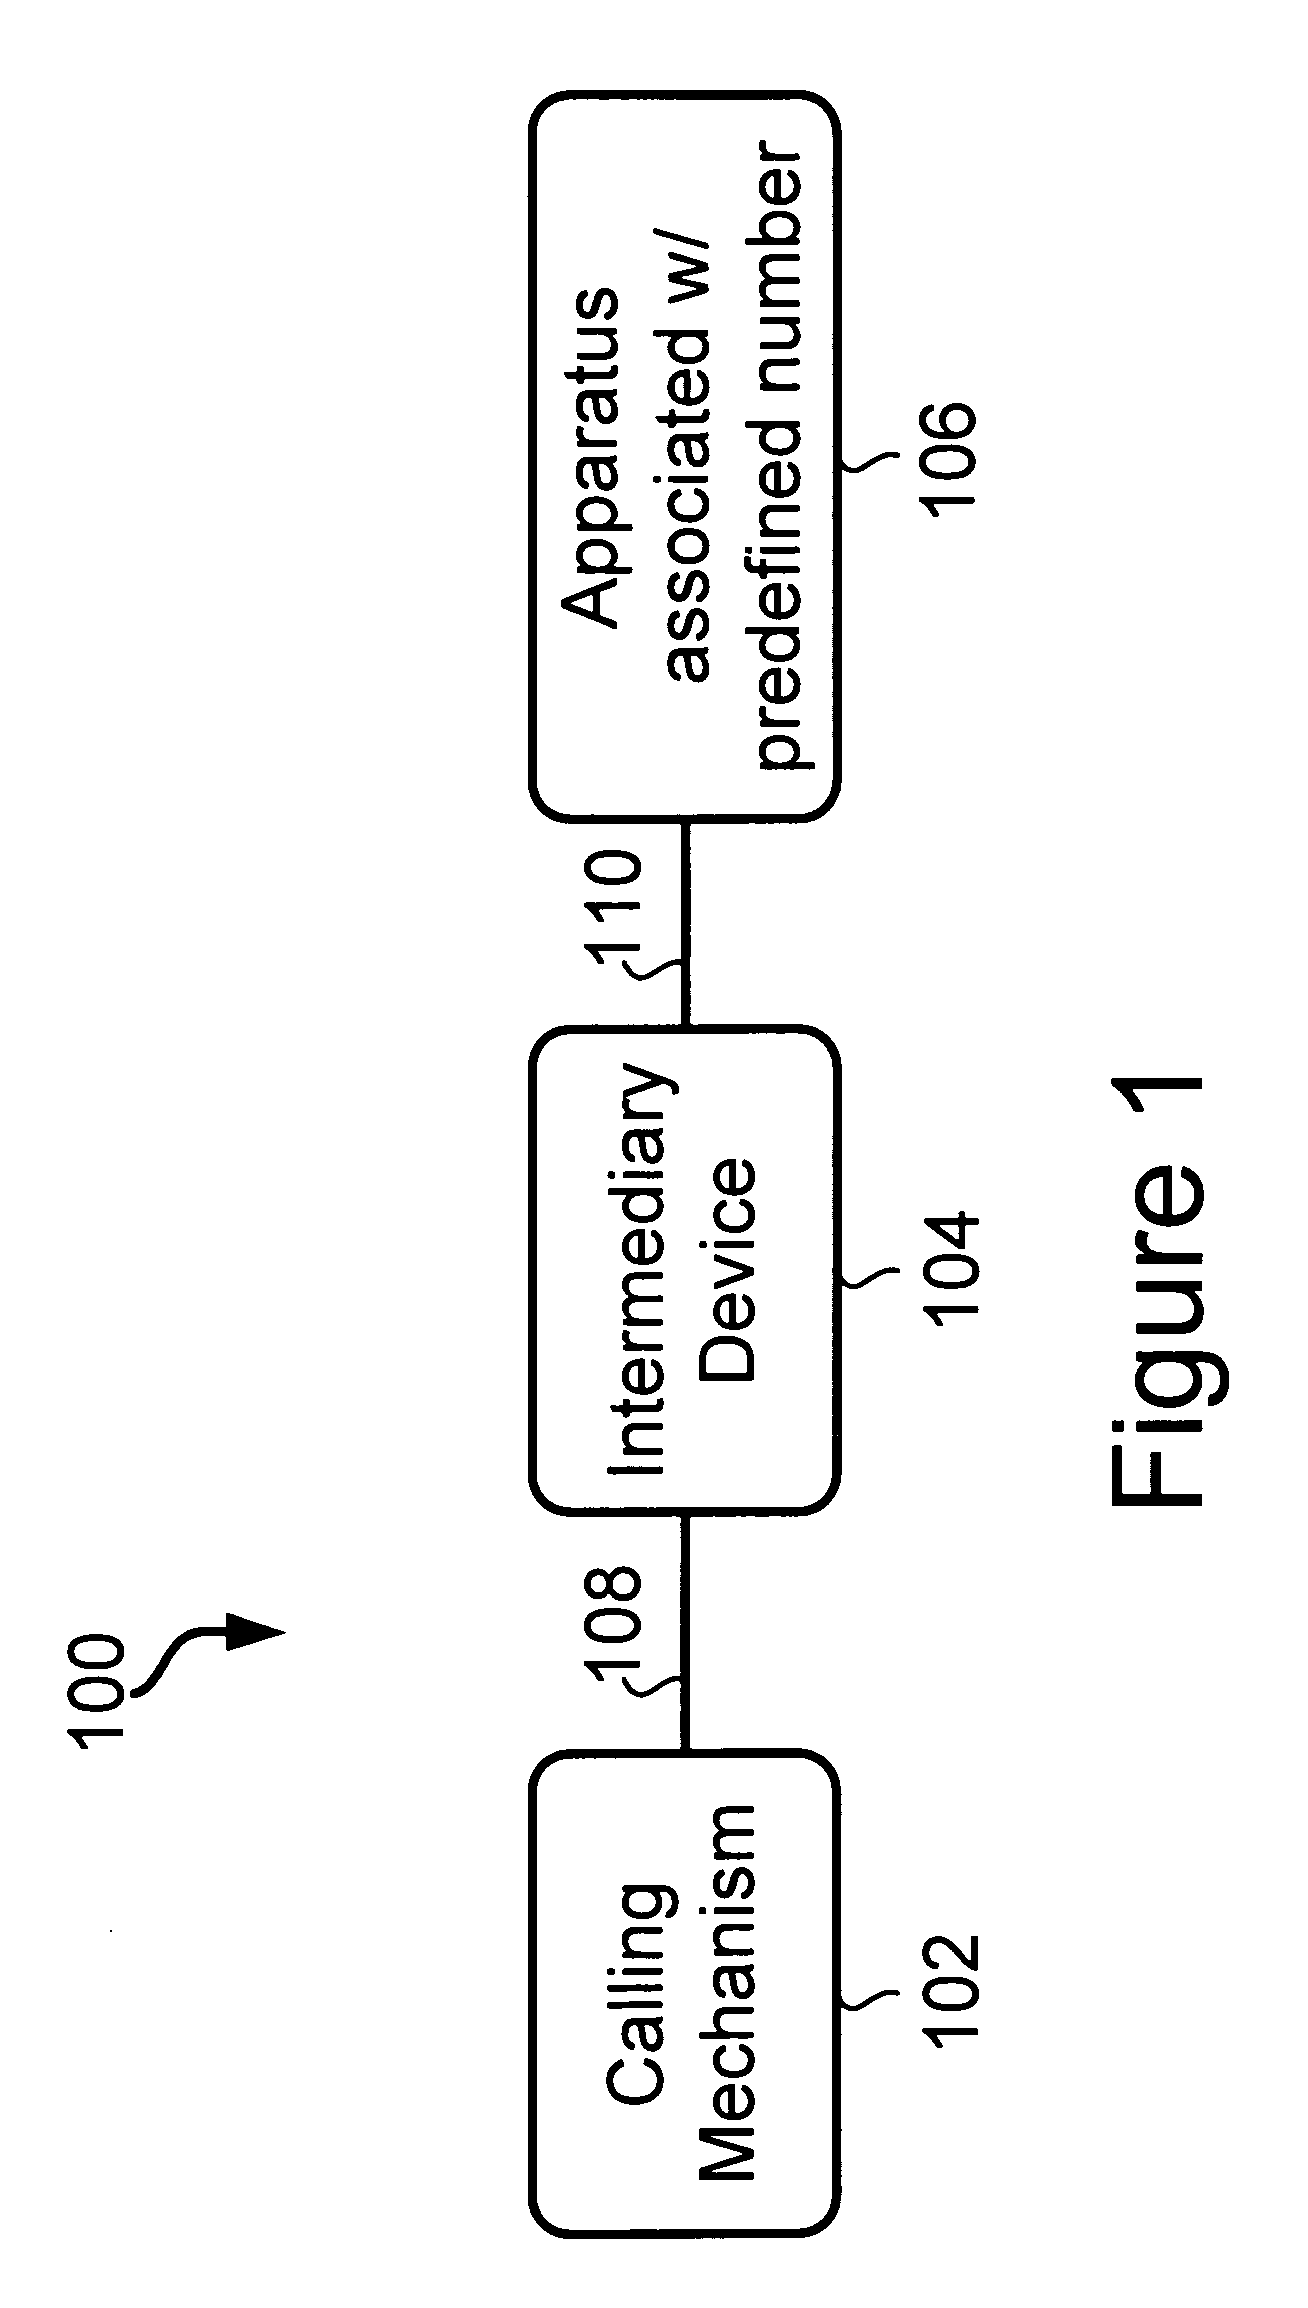 Method and intermediary device for reporting a civic address during an emergency call